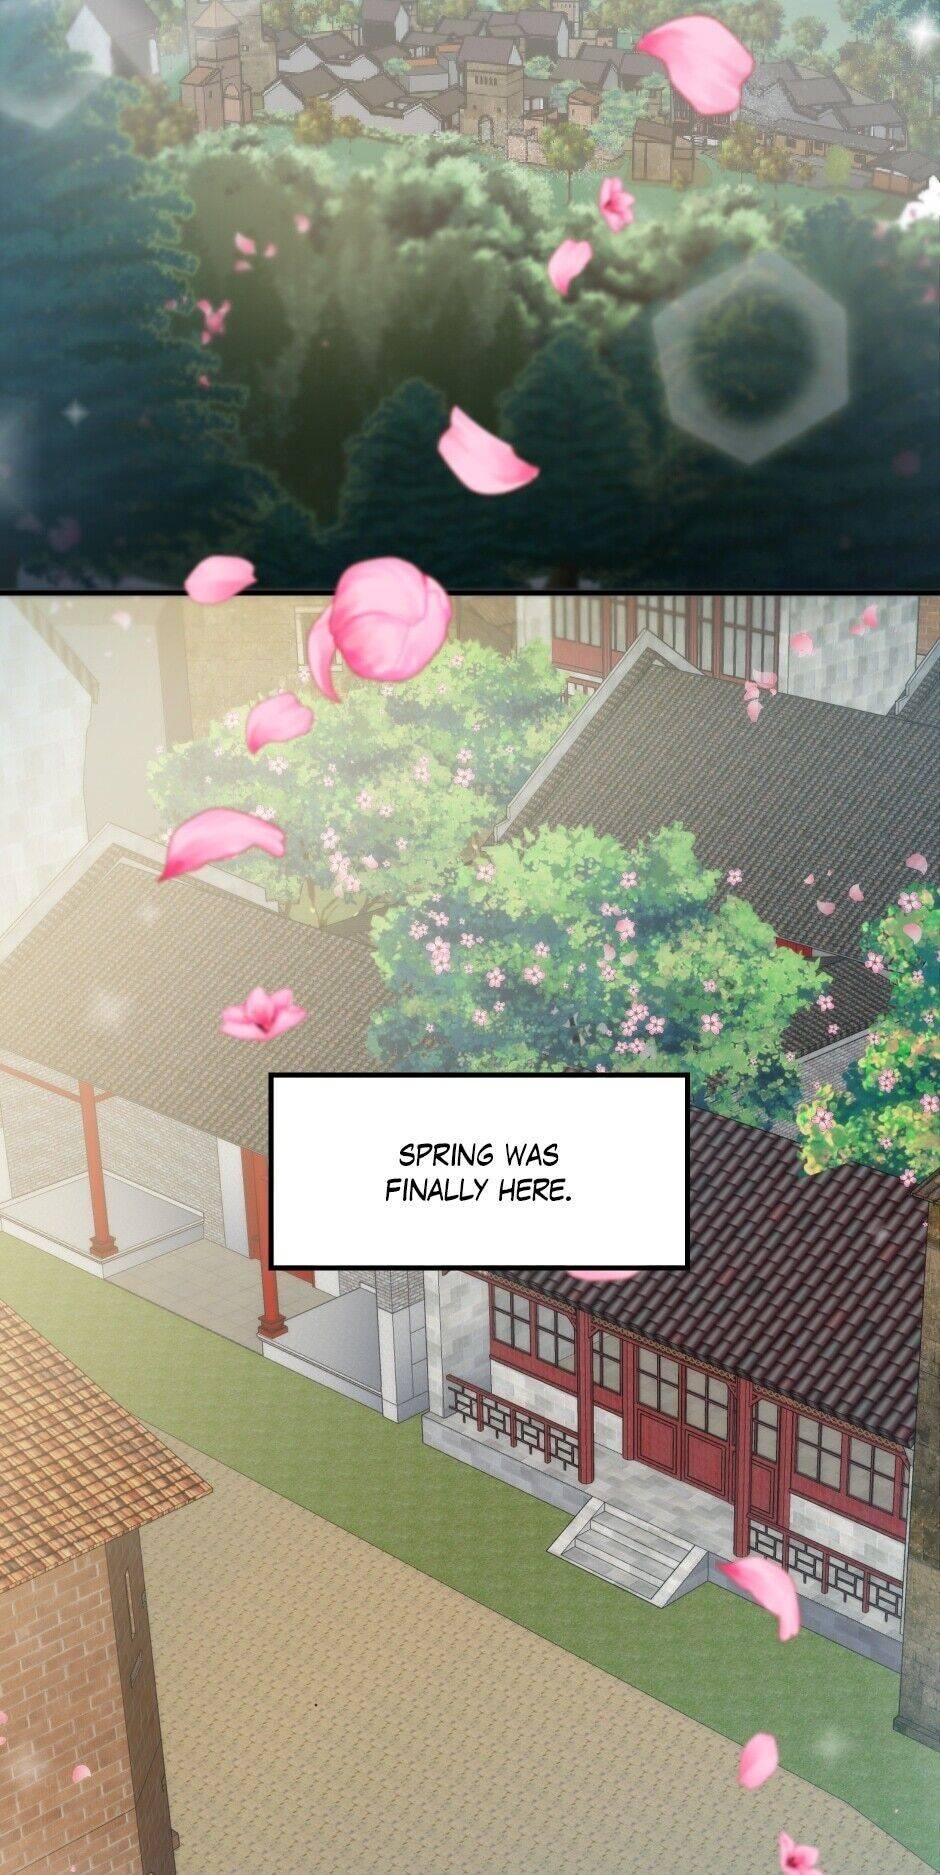 The Dragon Prince’s Bride chapter 73